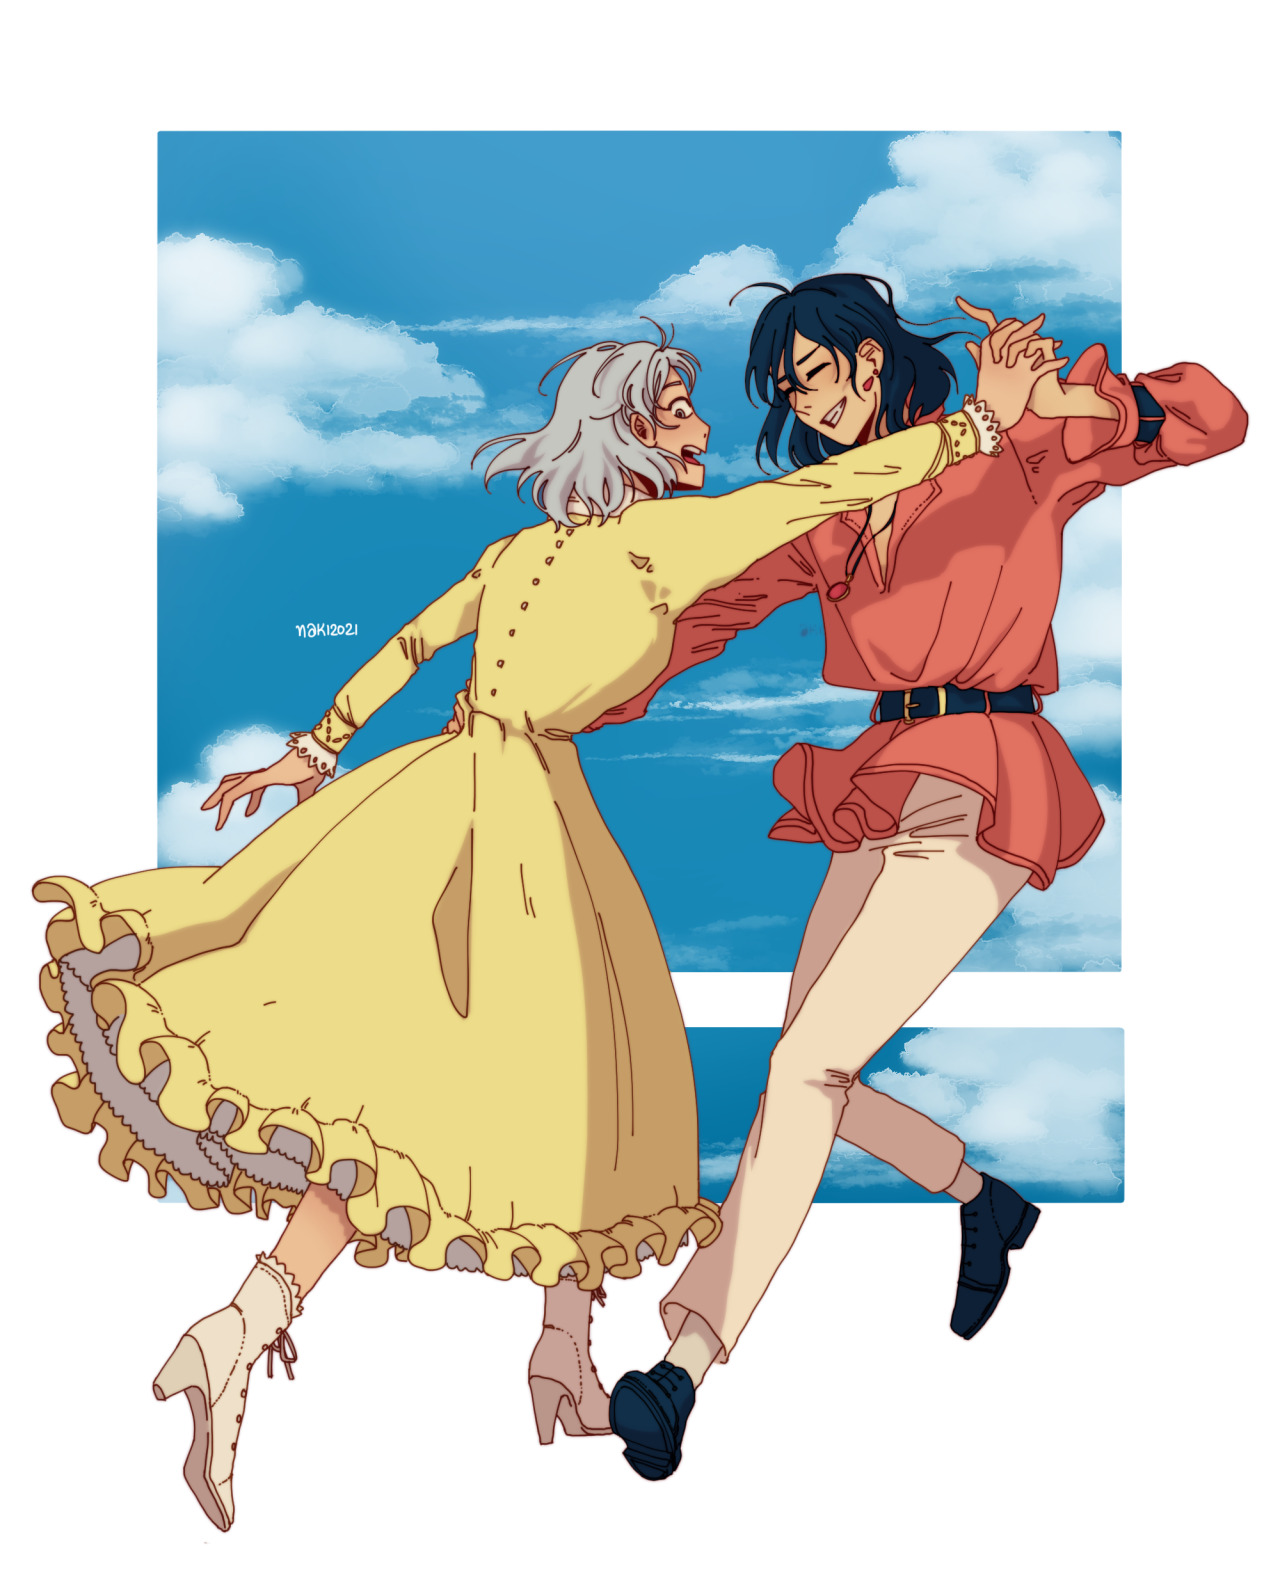 howl and sophie dancing uwu #howls moving castle #ghibli#studio ghibli#ghibli art #howls moving castle  #howl and sophie #dancing#anime#my art